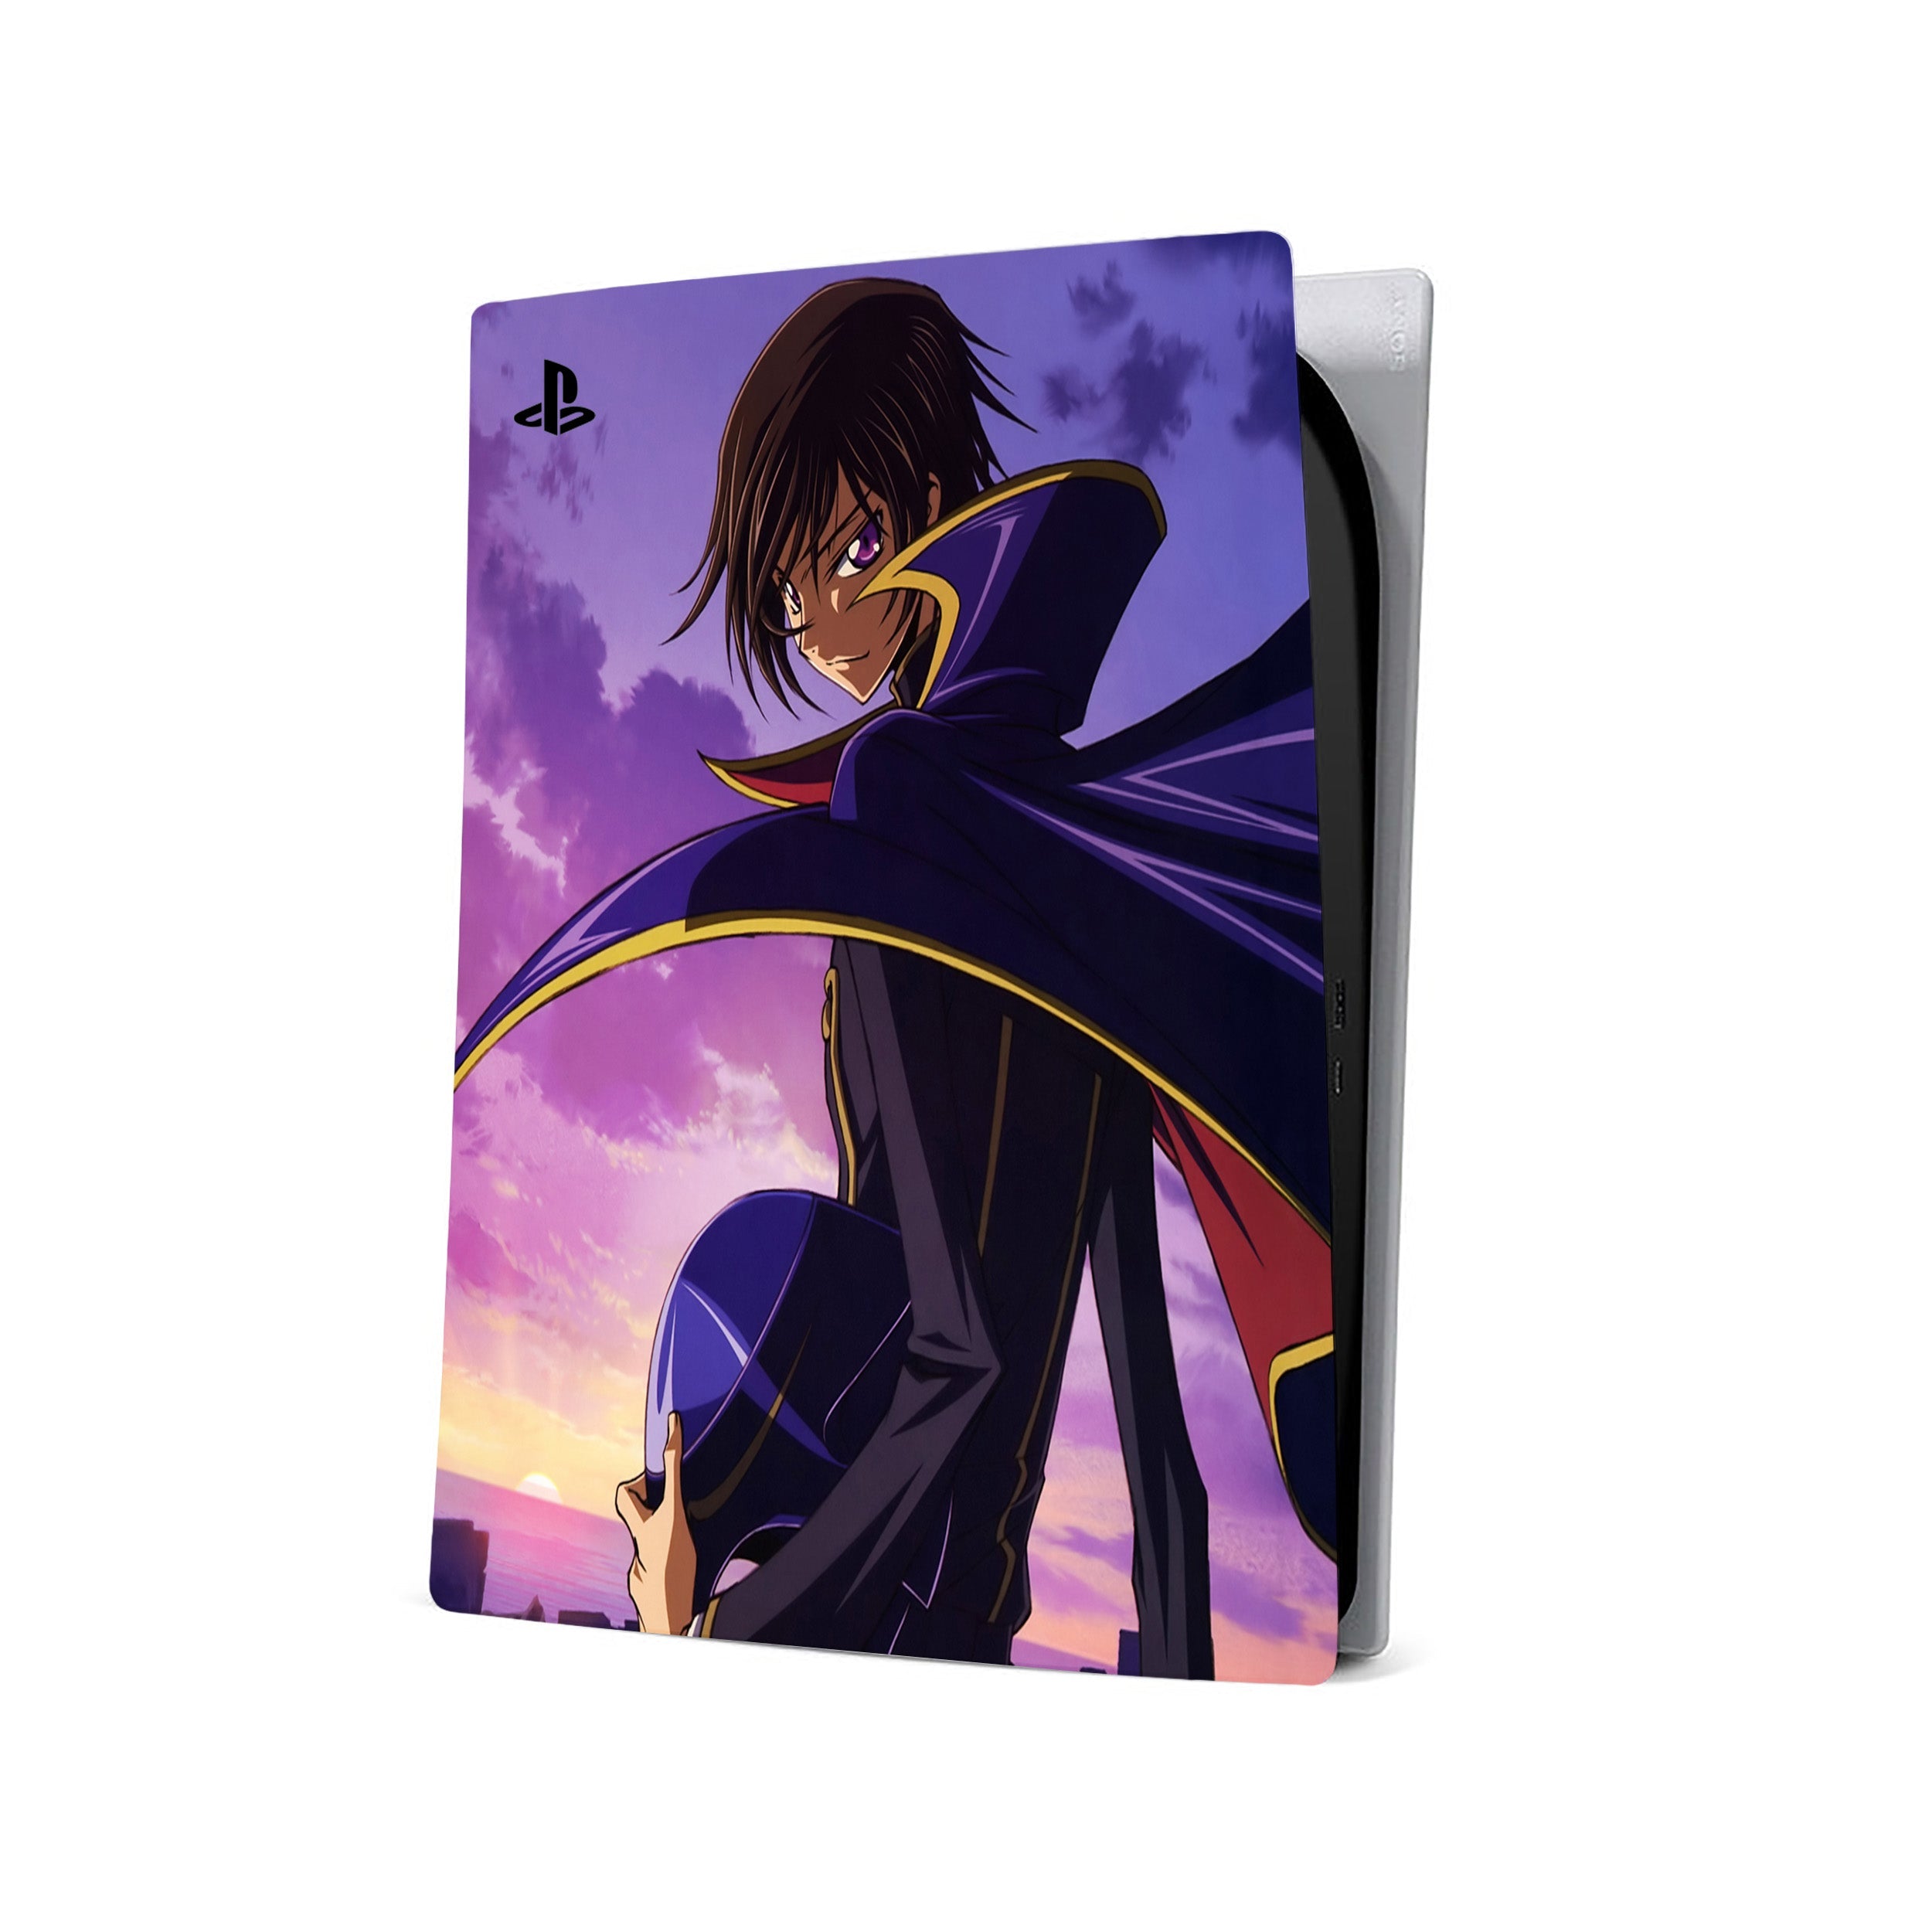 A video game skin featuring a Code Geass Lelouch Lamperoug design for the PS5.